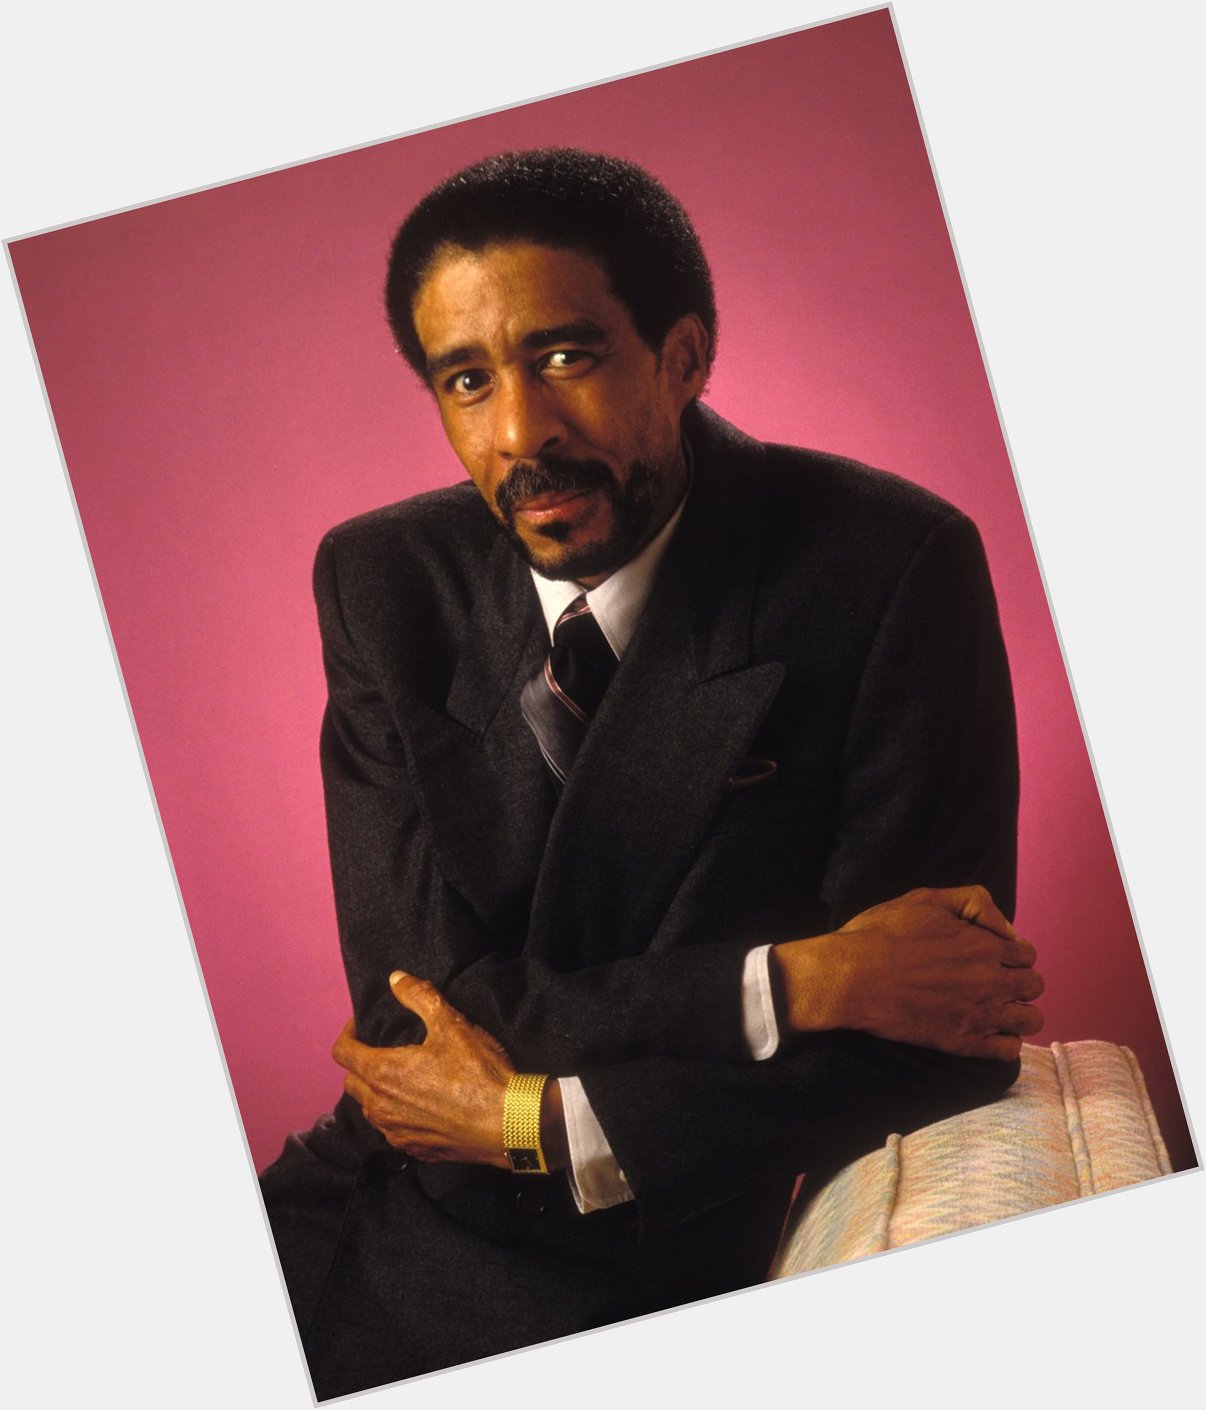 Richard Pryor would have turned 80 years old today.

Happy Birthday to a comedy legend 